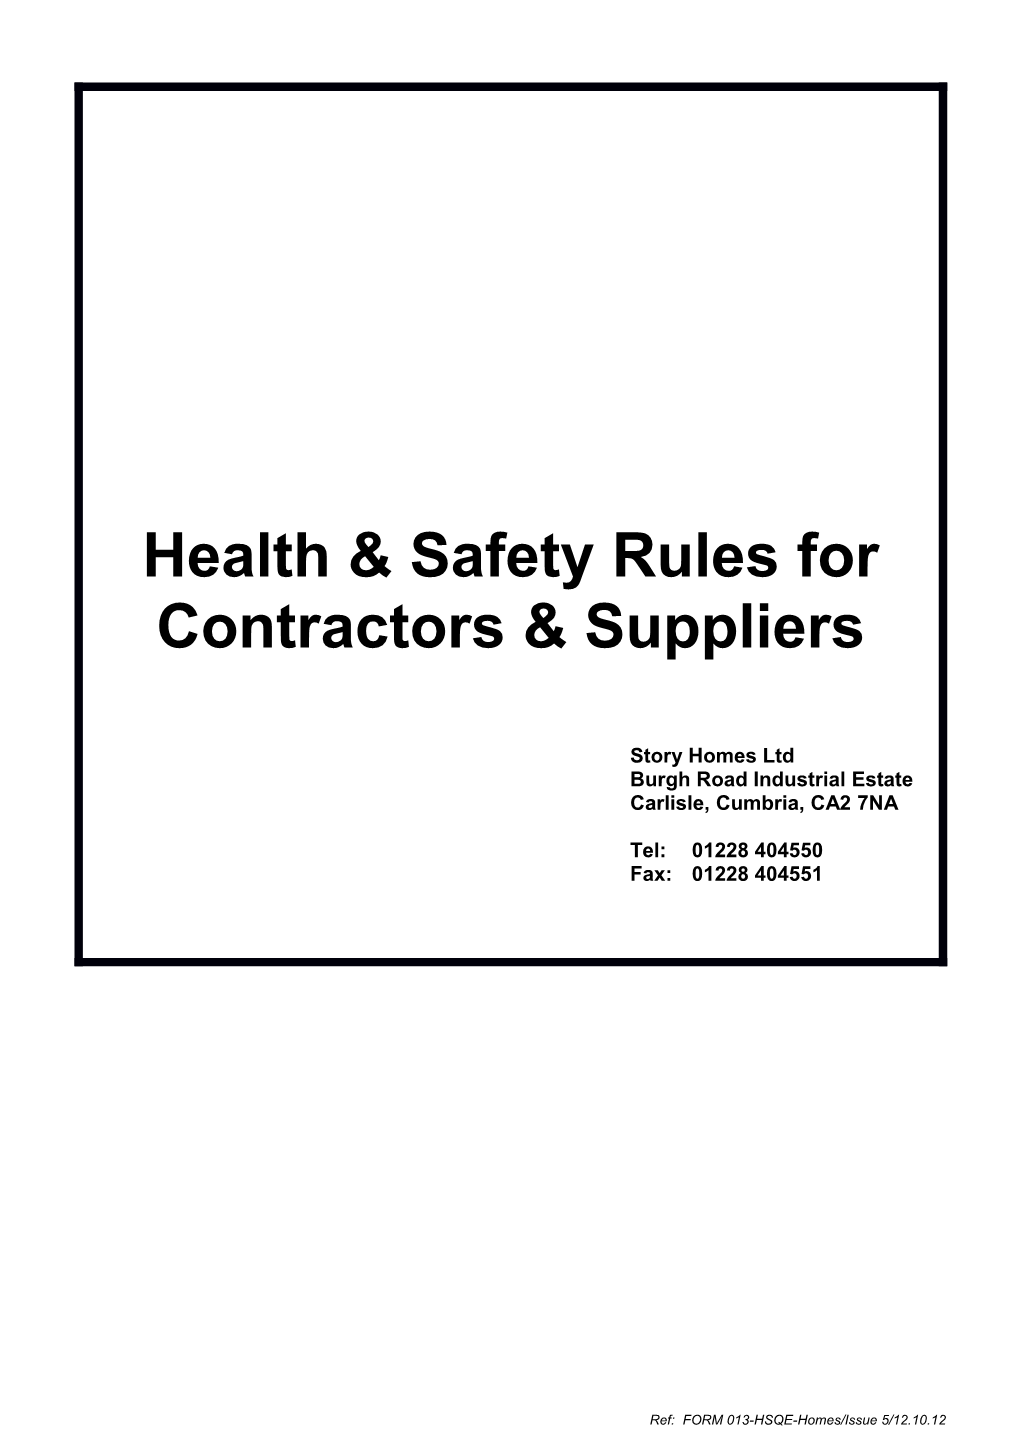 Sub Contractors and Suppliers Rules Form